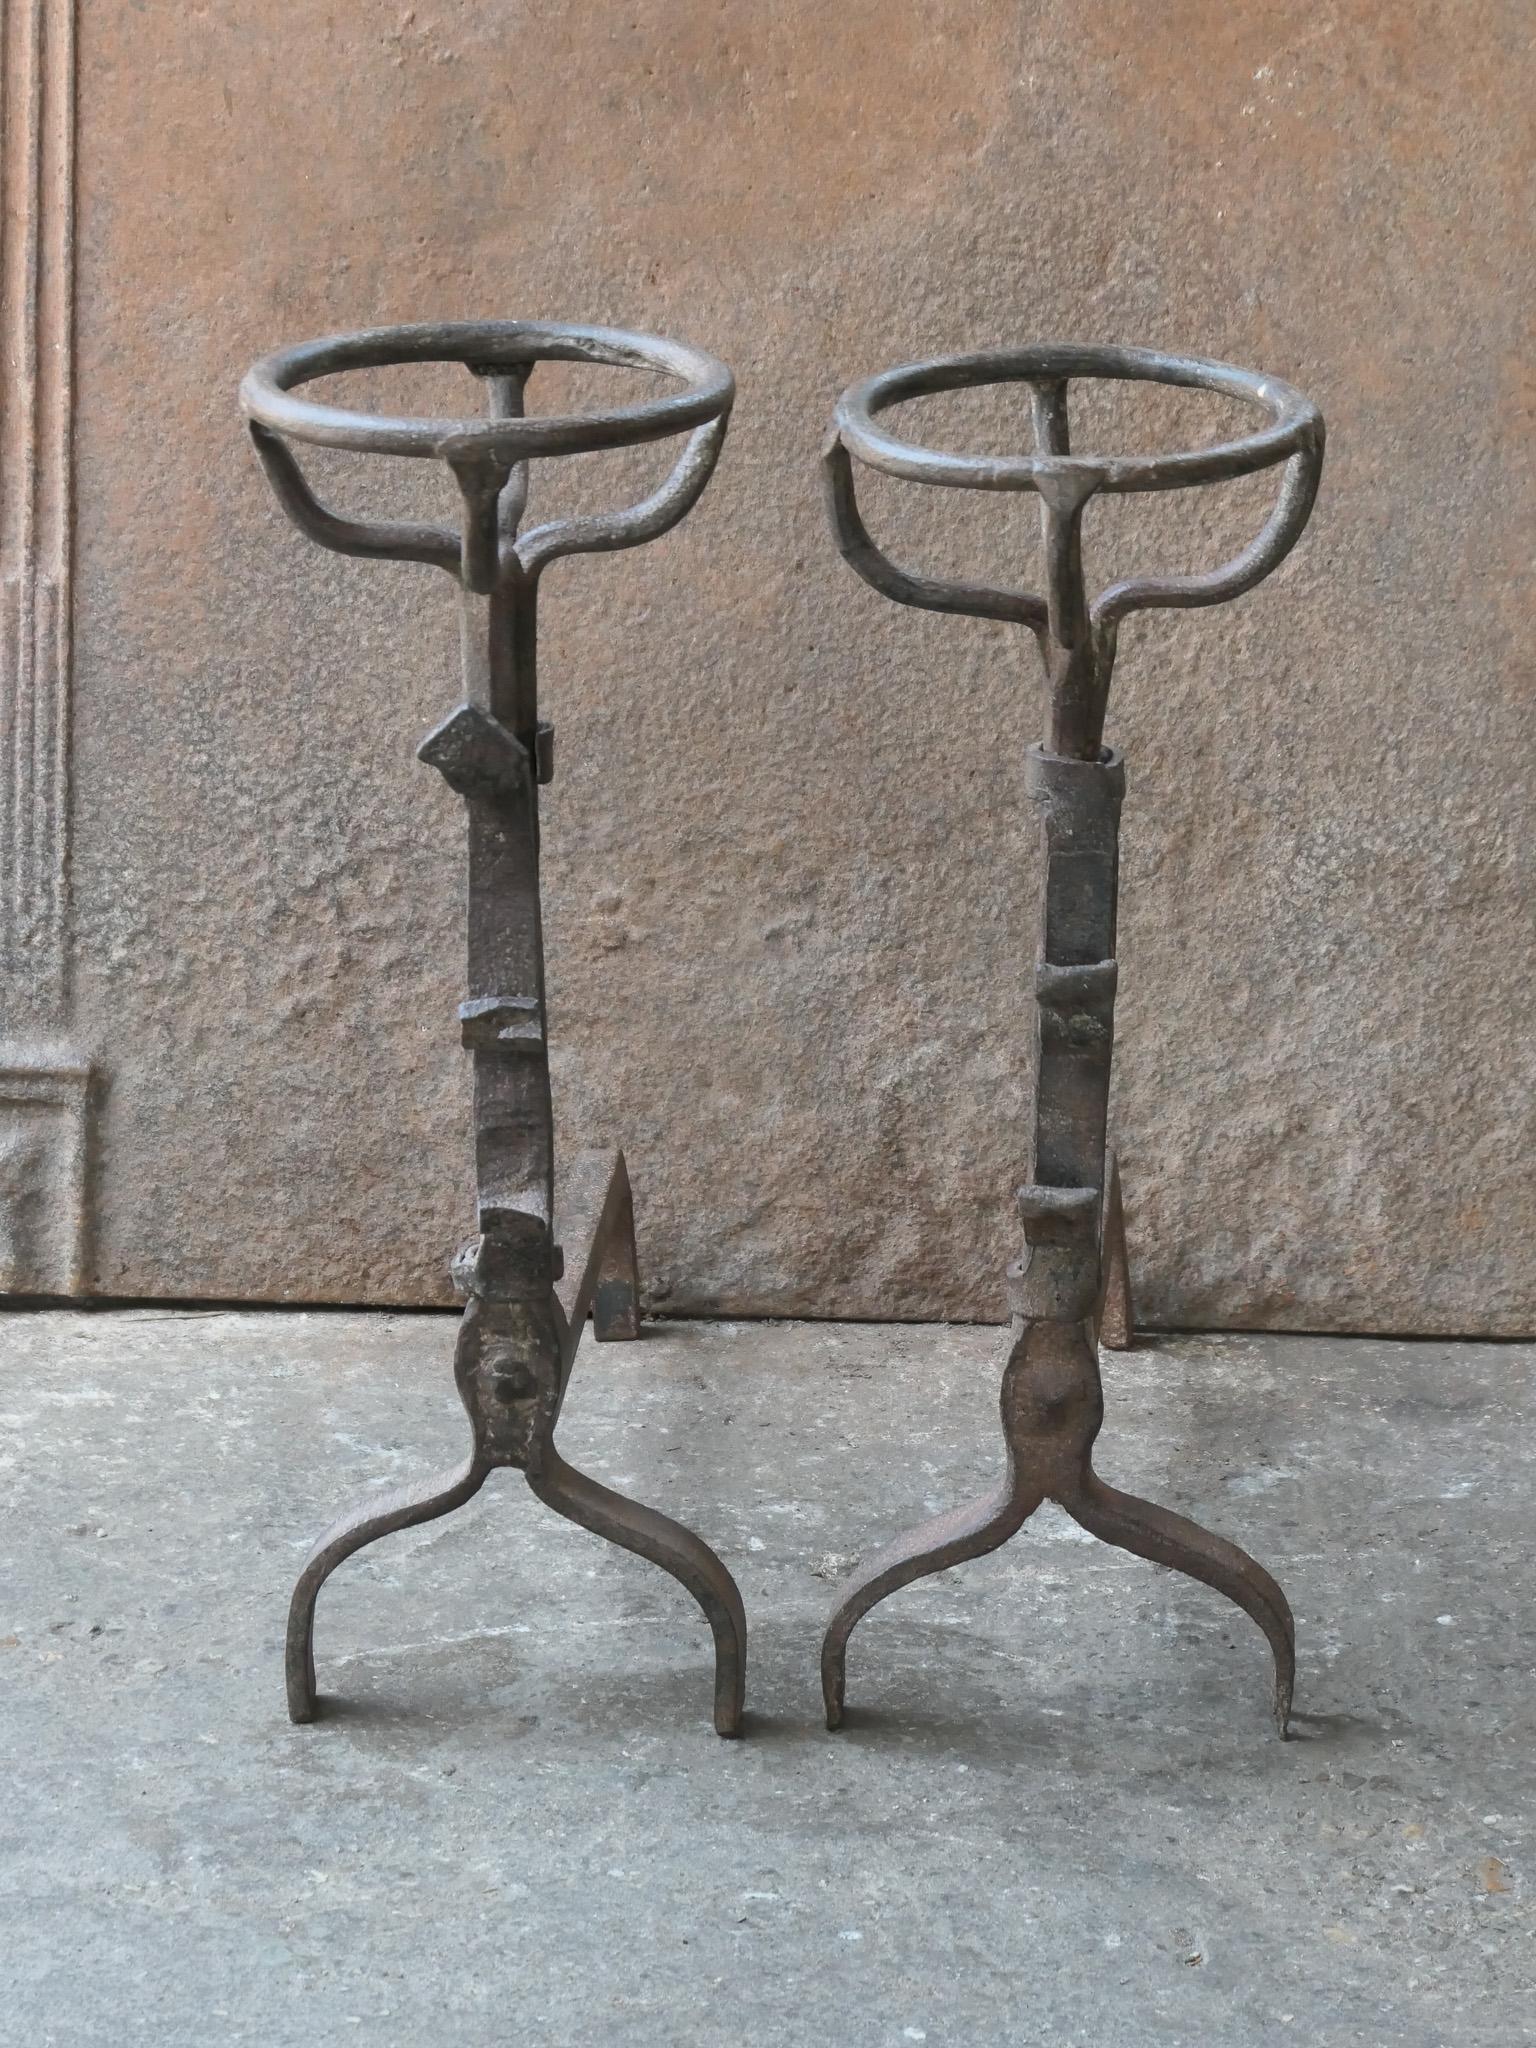 17th century French gothic andirons - fire dogs made of wrought iron. They have spit hooks to grill meat or poultry. 
